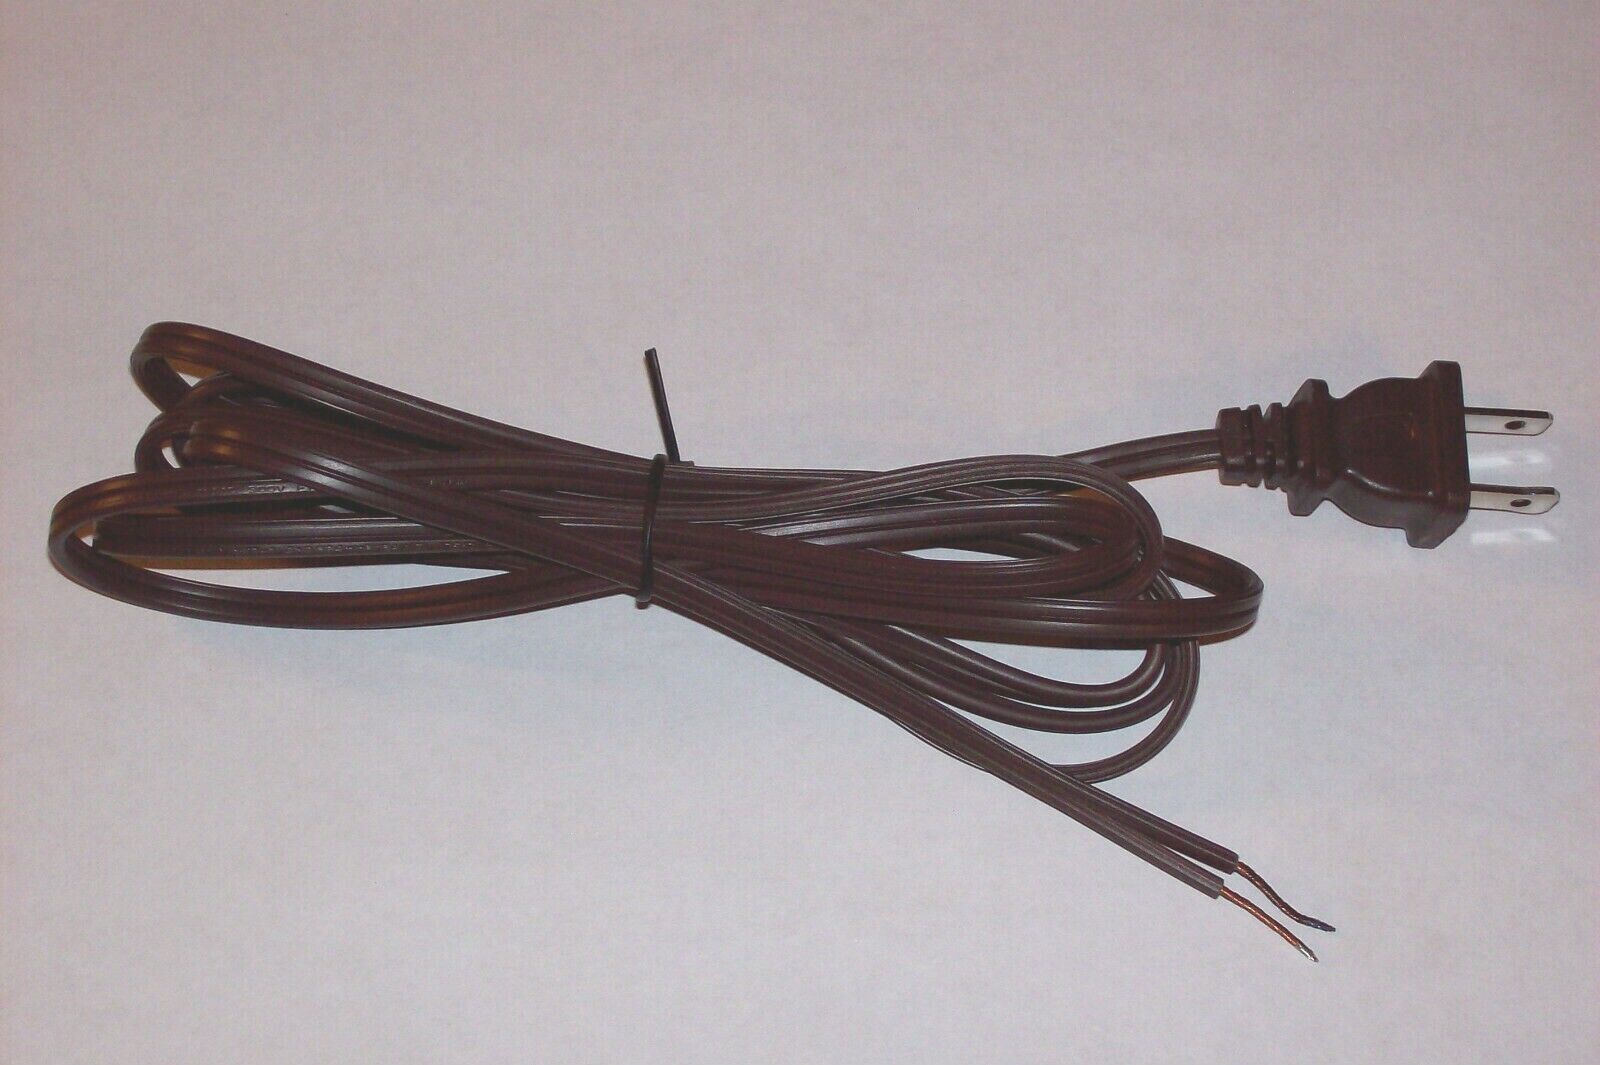 8' BROWN PLASTIC COVERED LAMP CORD WITH POLARIZED PLUG 18/2 SPT-1 NEW 46710JB